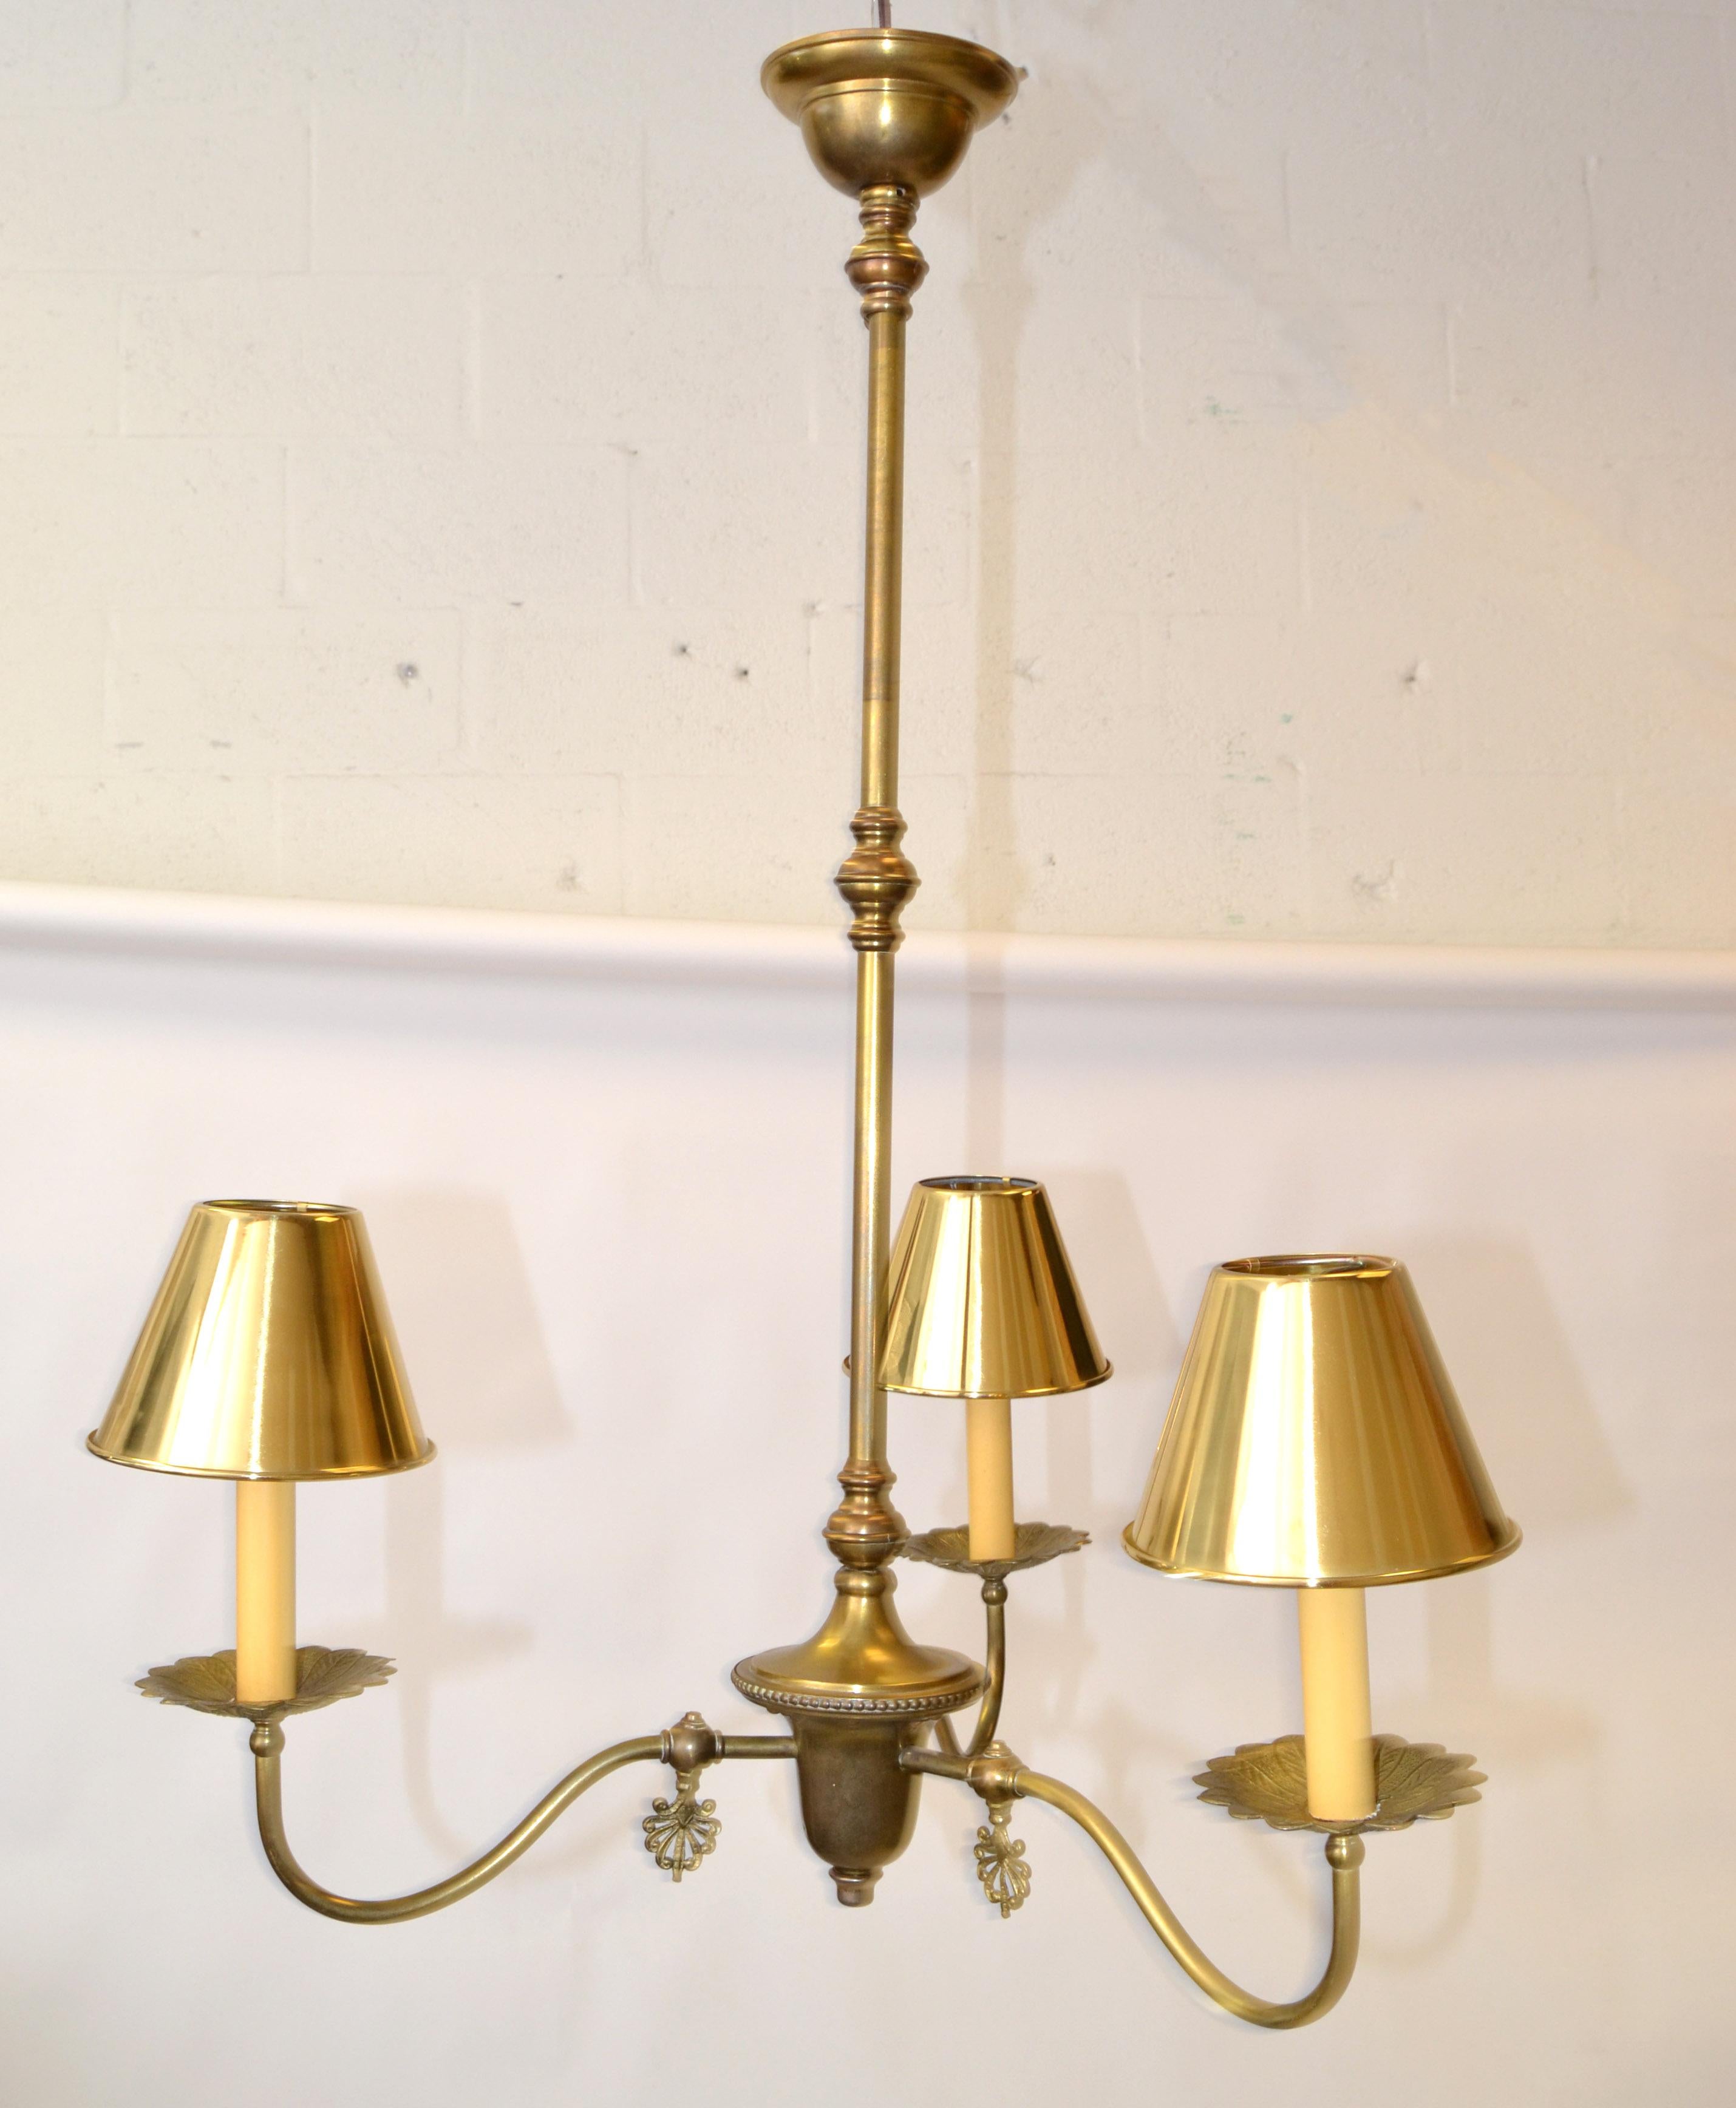 French neoclassical 3 light pendant lamp chandelier in brass with brass clip-on shades.
Handcrafted Ornate brass saucers and decoration made in the 1950s in France.
Wired for the US and takes 3 candelabras light bulbs, 25 watts / 120 V.
New brass